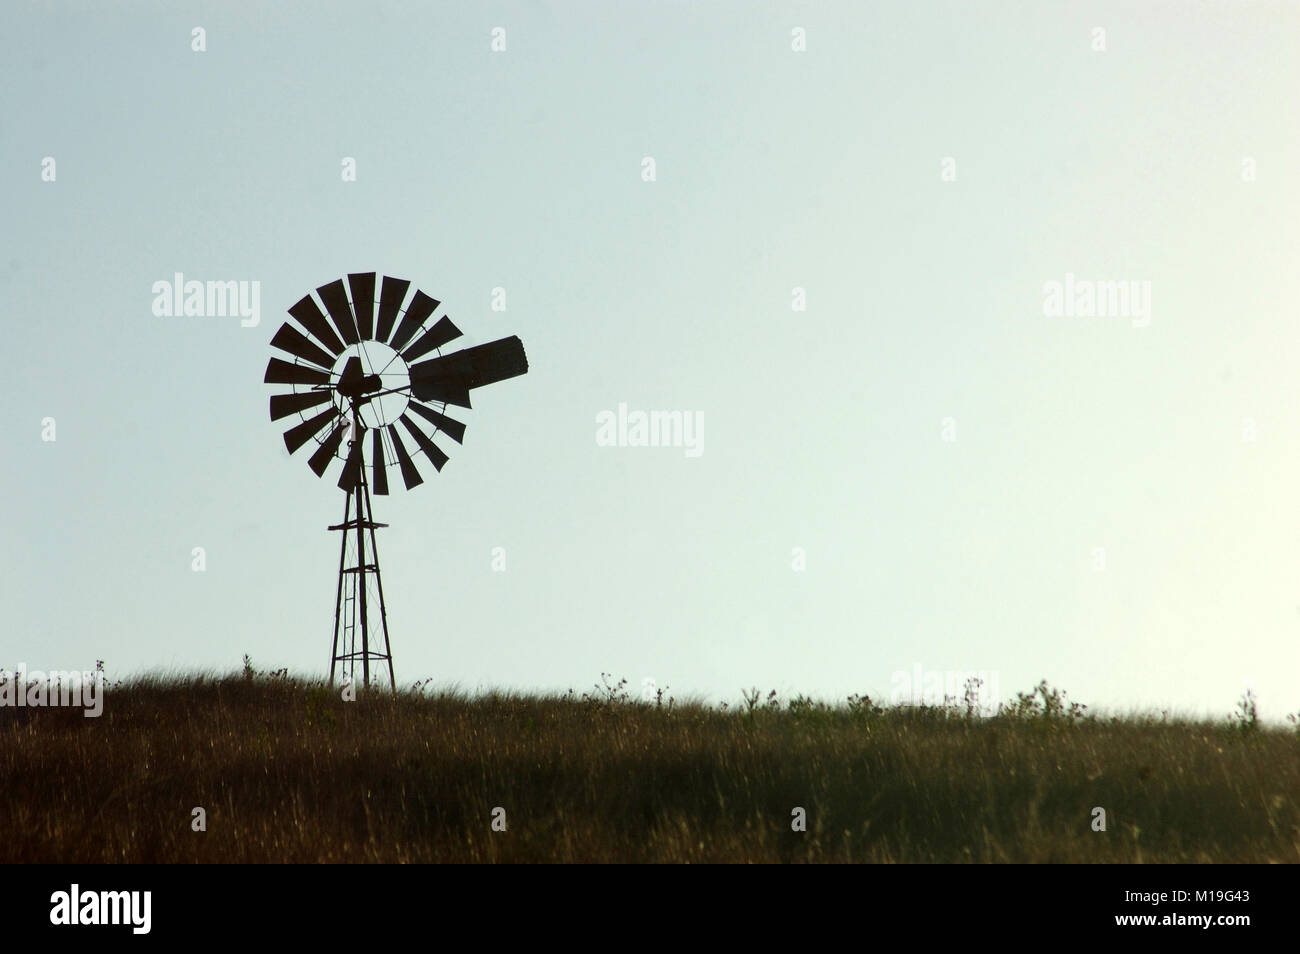 Silhouette of windmill in paddock, Queensland, Australia. Windmills are commonly used for pumping water from bores or dams to troughs for livestock. Stock Photo